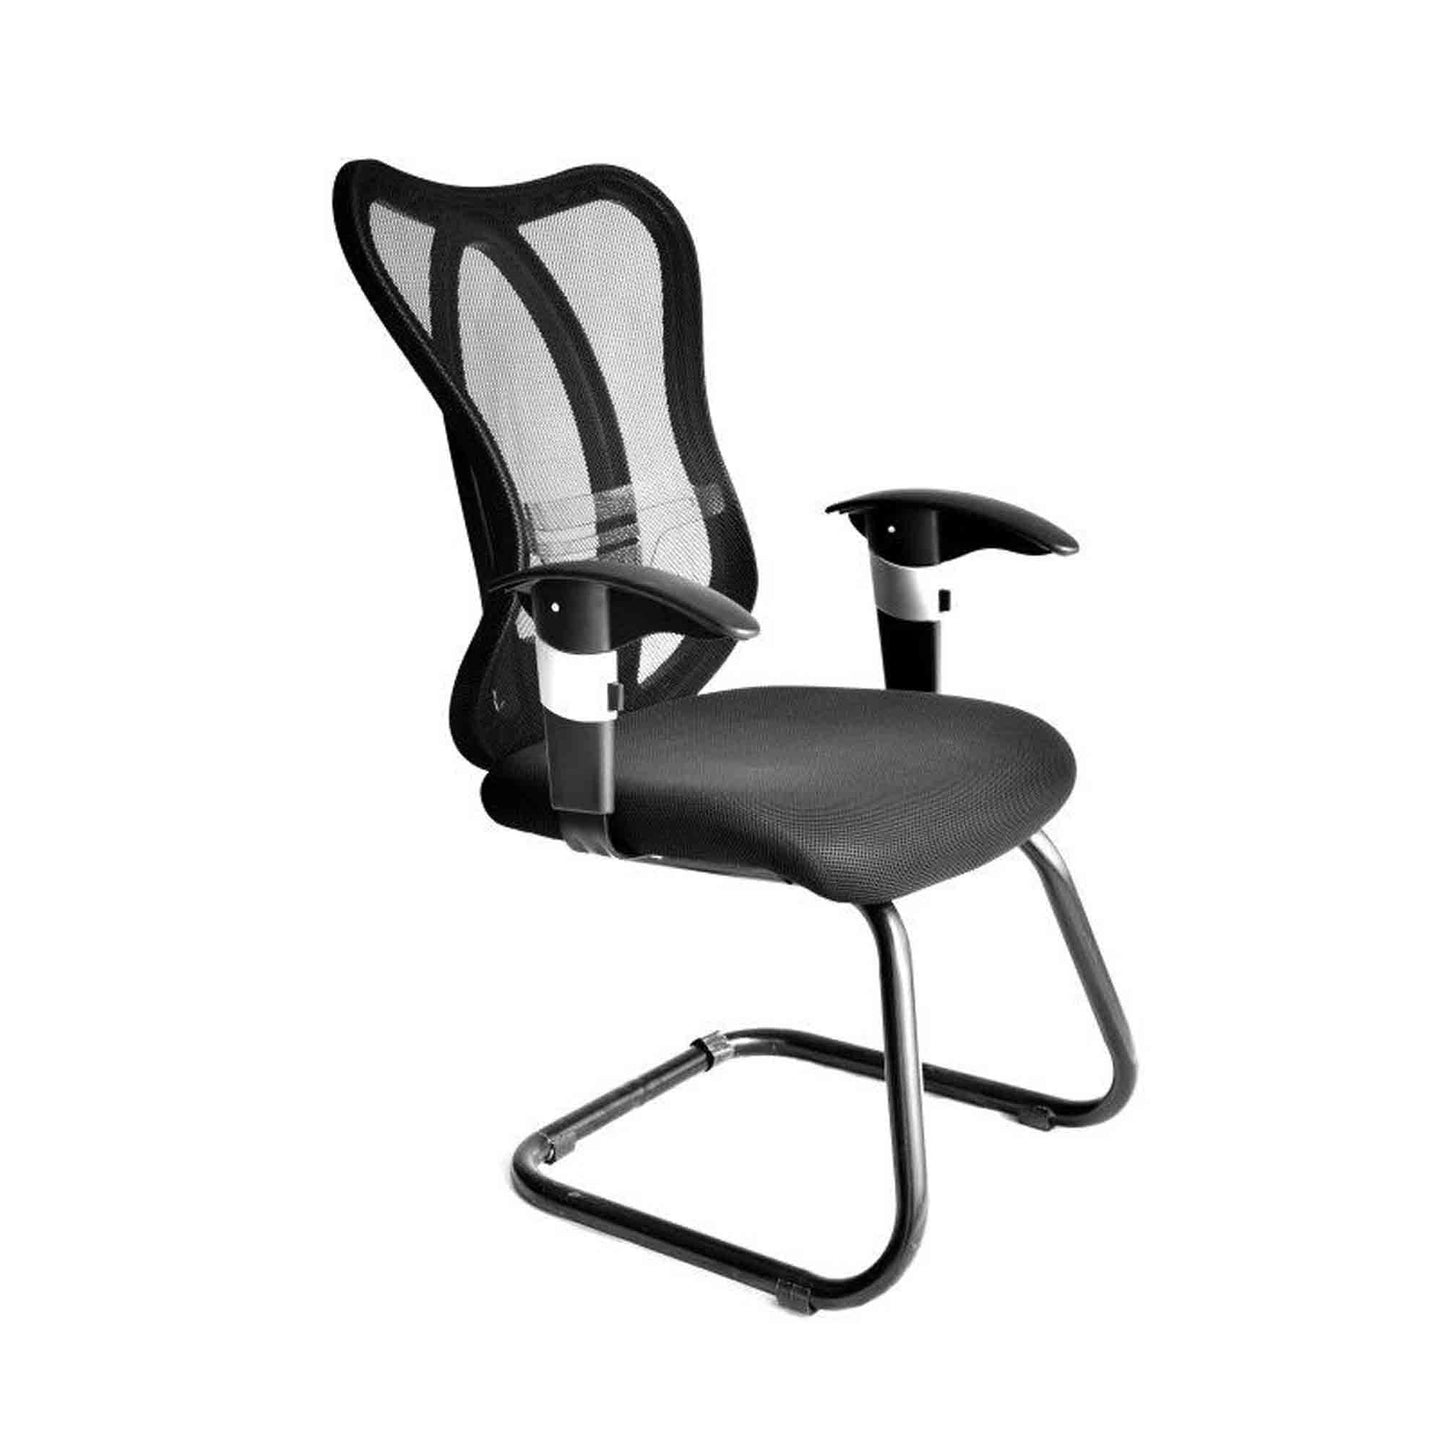 Office Chair - mch69c